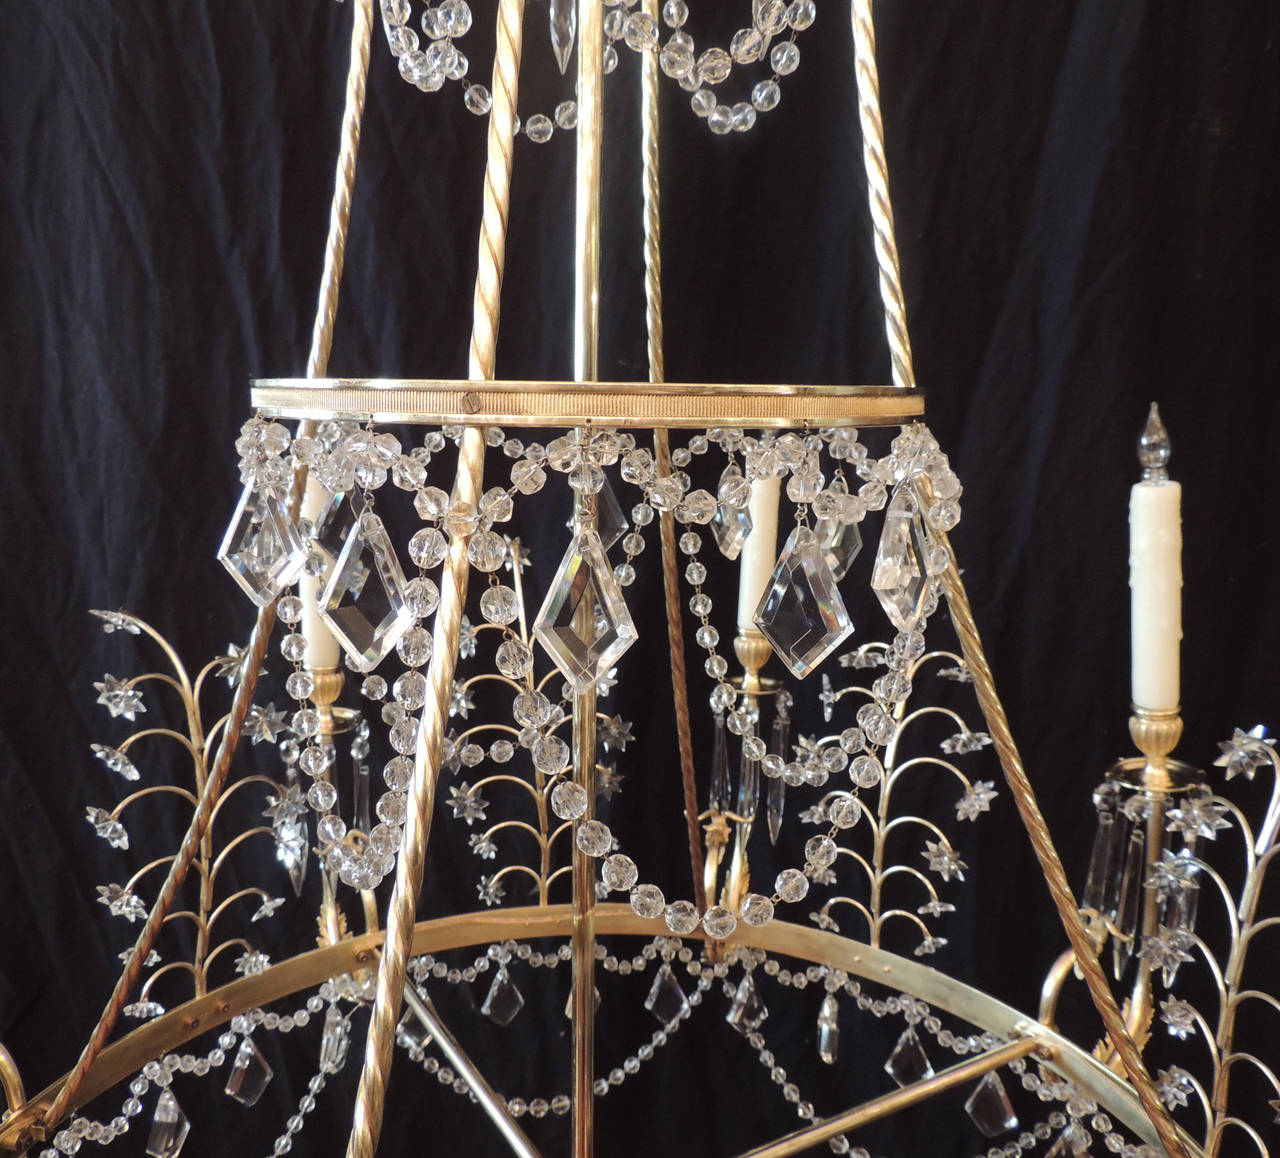 This chandelier was made in the first half of the 20th century in the Baltic States of Europe. This chandelier features three graduated rings decorated with crystal swags, French drops, and rosettes and one bottom ring that supports a crystal ball.